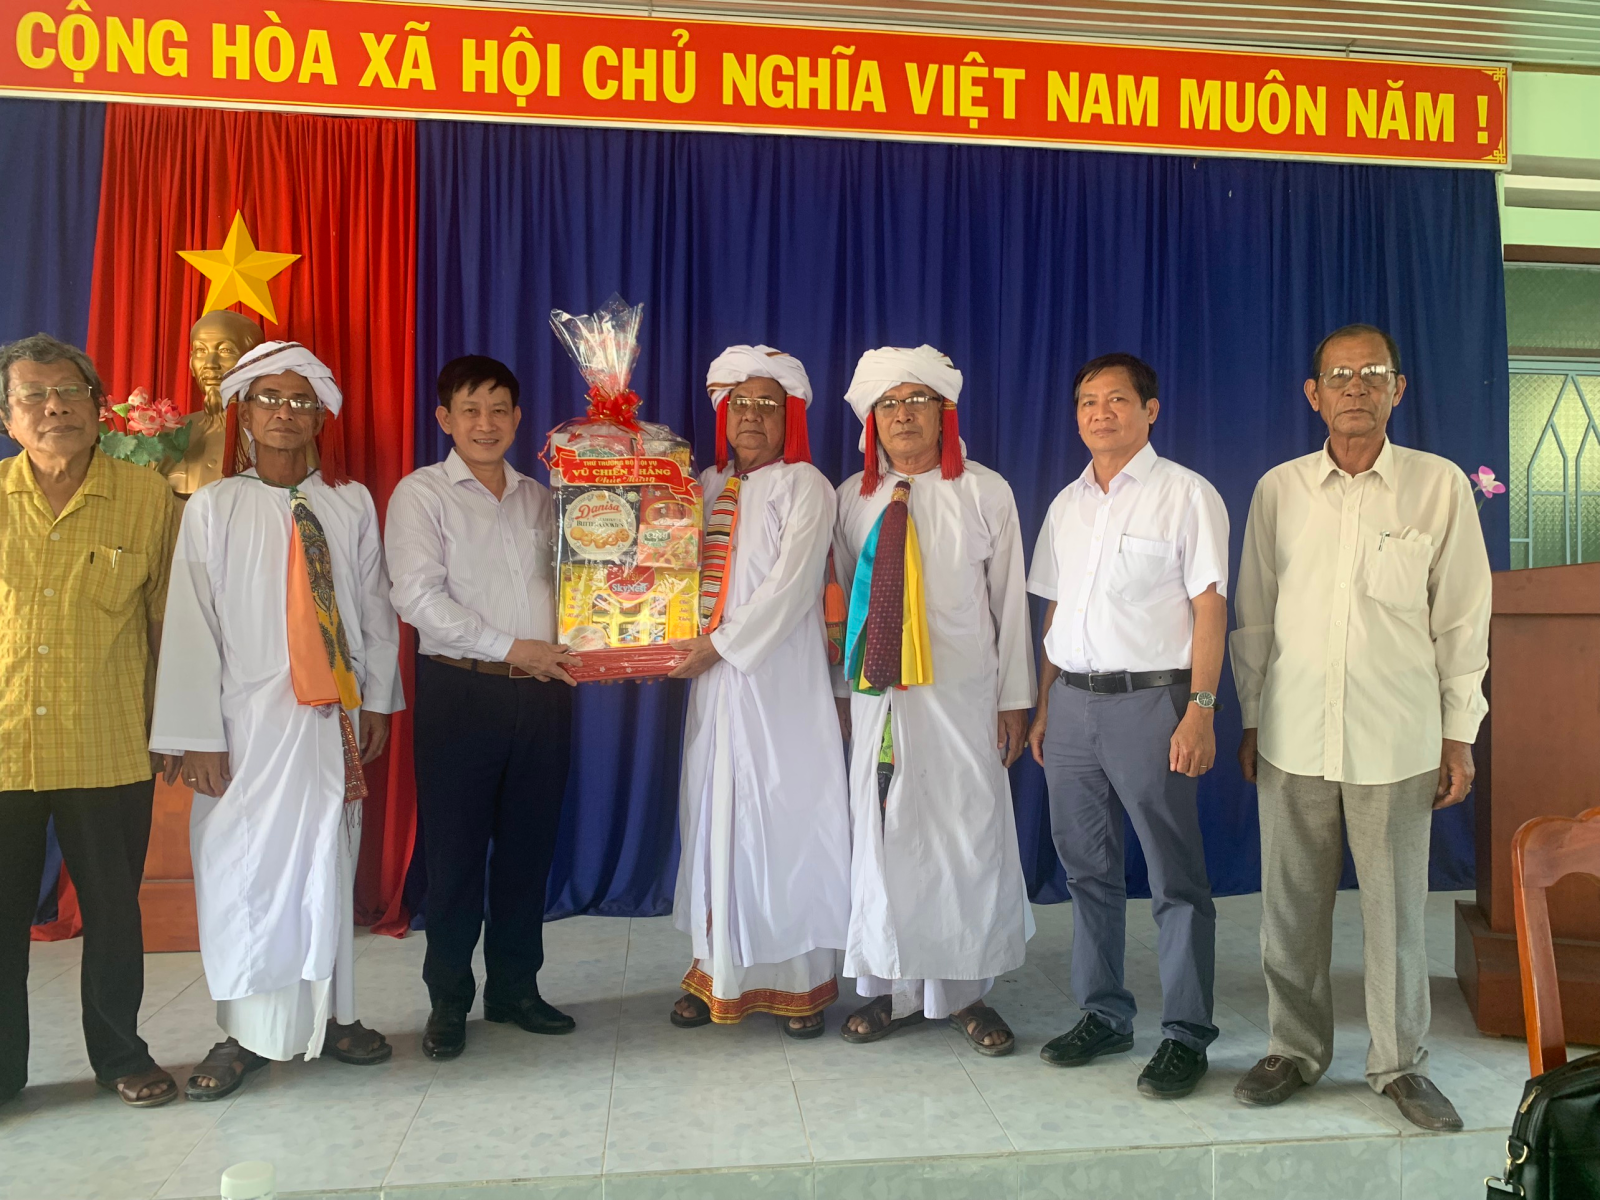 http://cms.btgcp.gov.vn/upload-img/userfiles/images/image-20230427155805-1.png